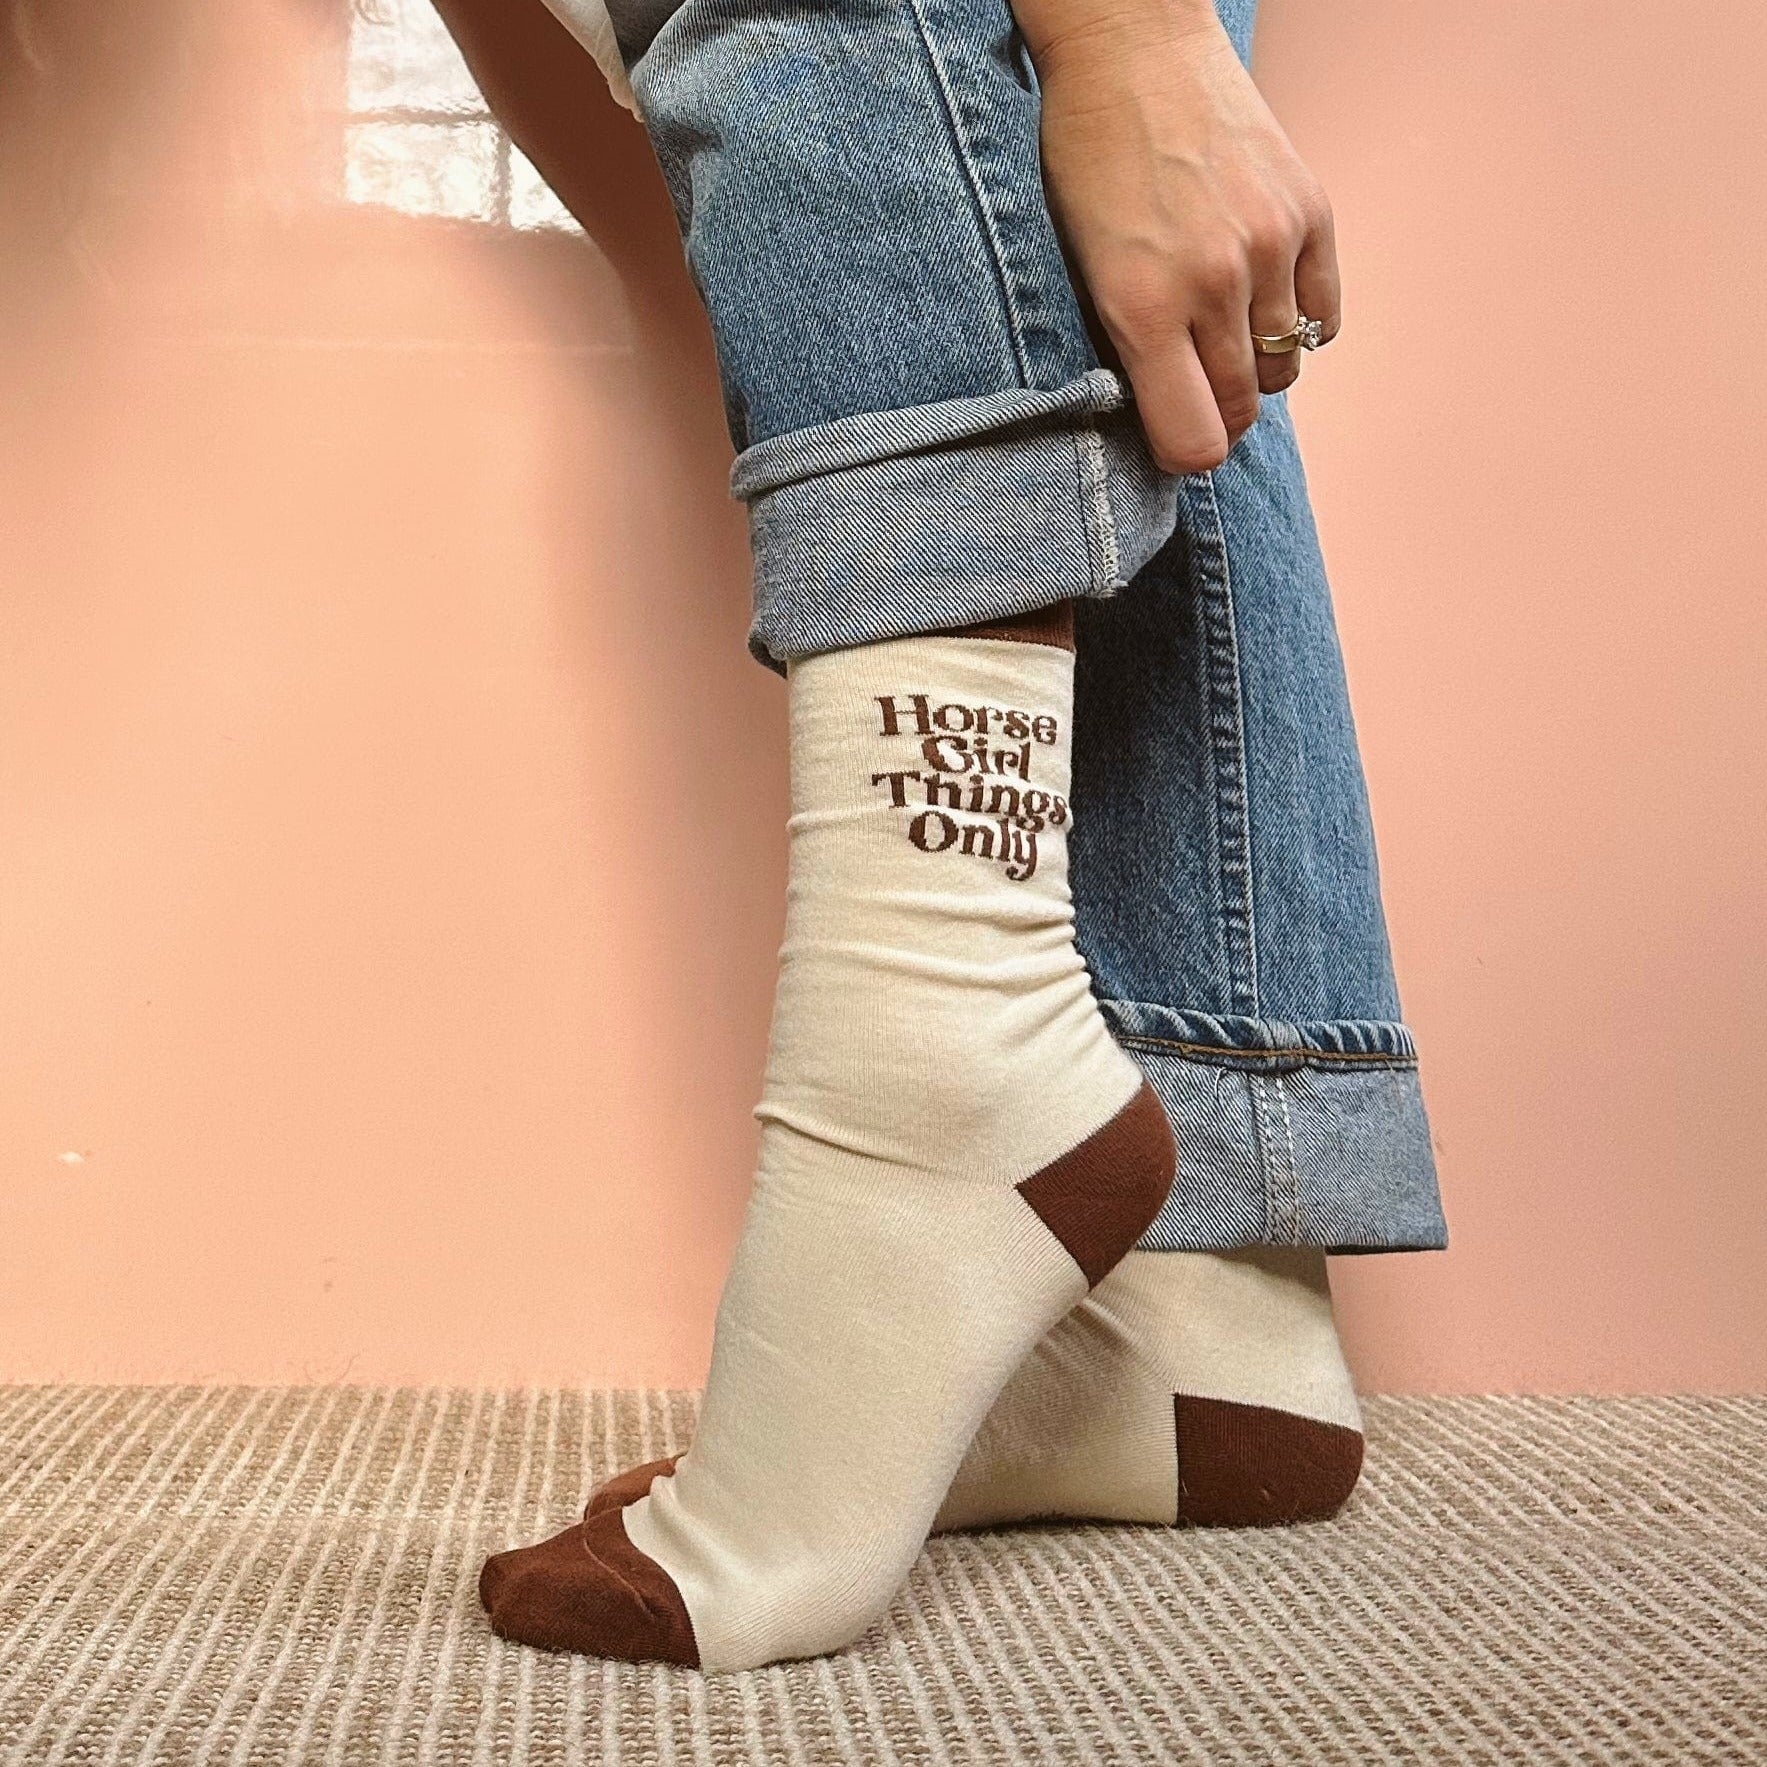 dreamers & schemers Crew Sock CAHG Horse Girl Things Only 3 Pack of Crew Socks!! equestrian boot socks boot socks thin socks riding socks pattern socks tall socks funny socks knee high socks horse socks horse show socks